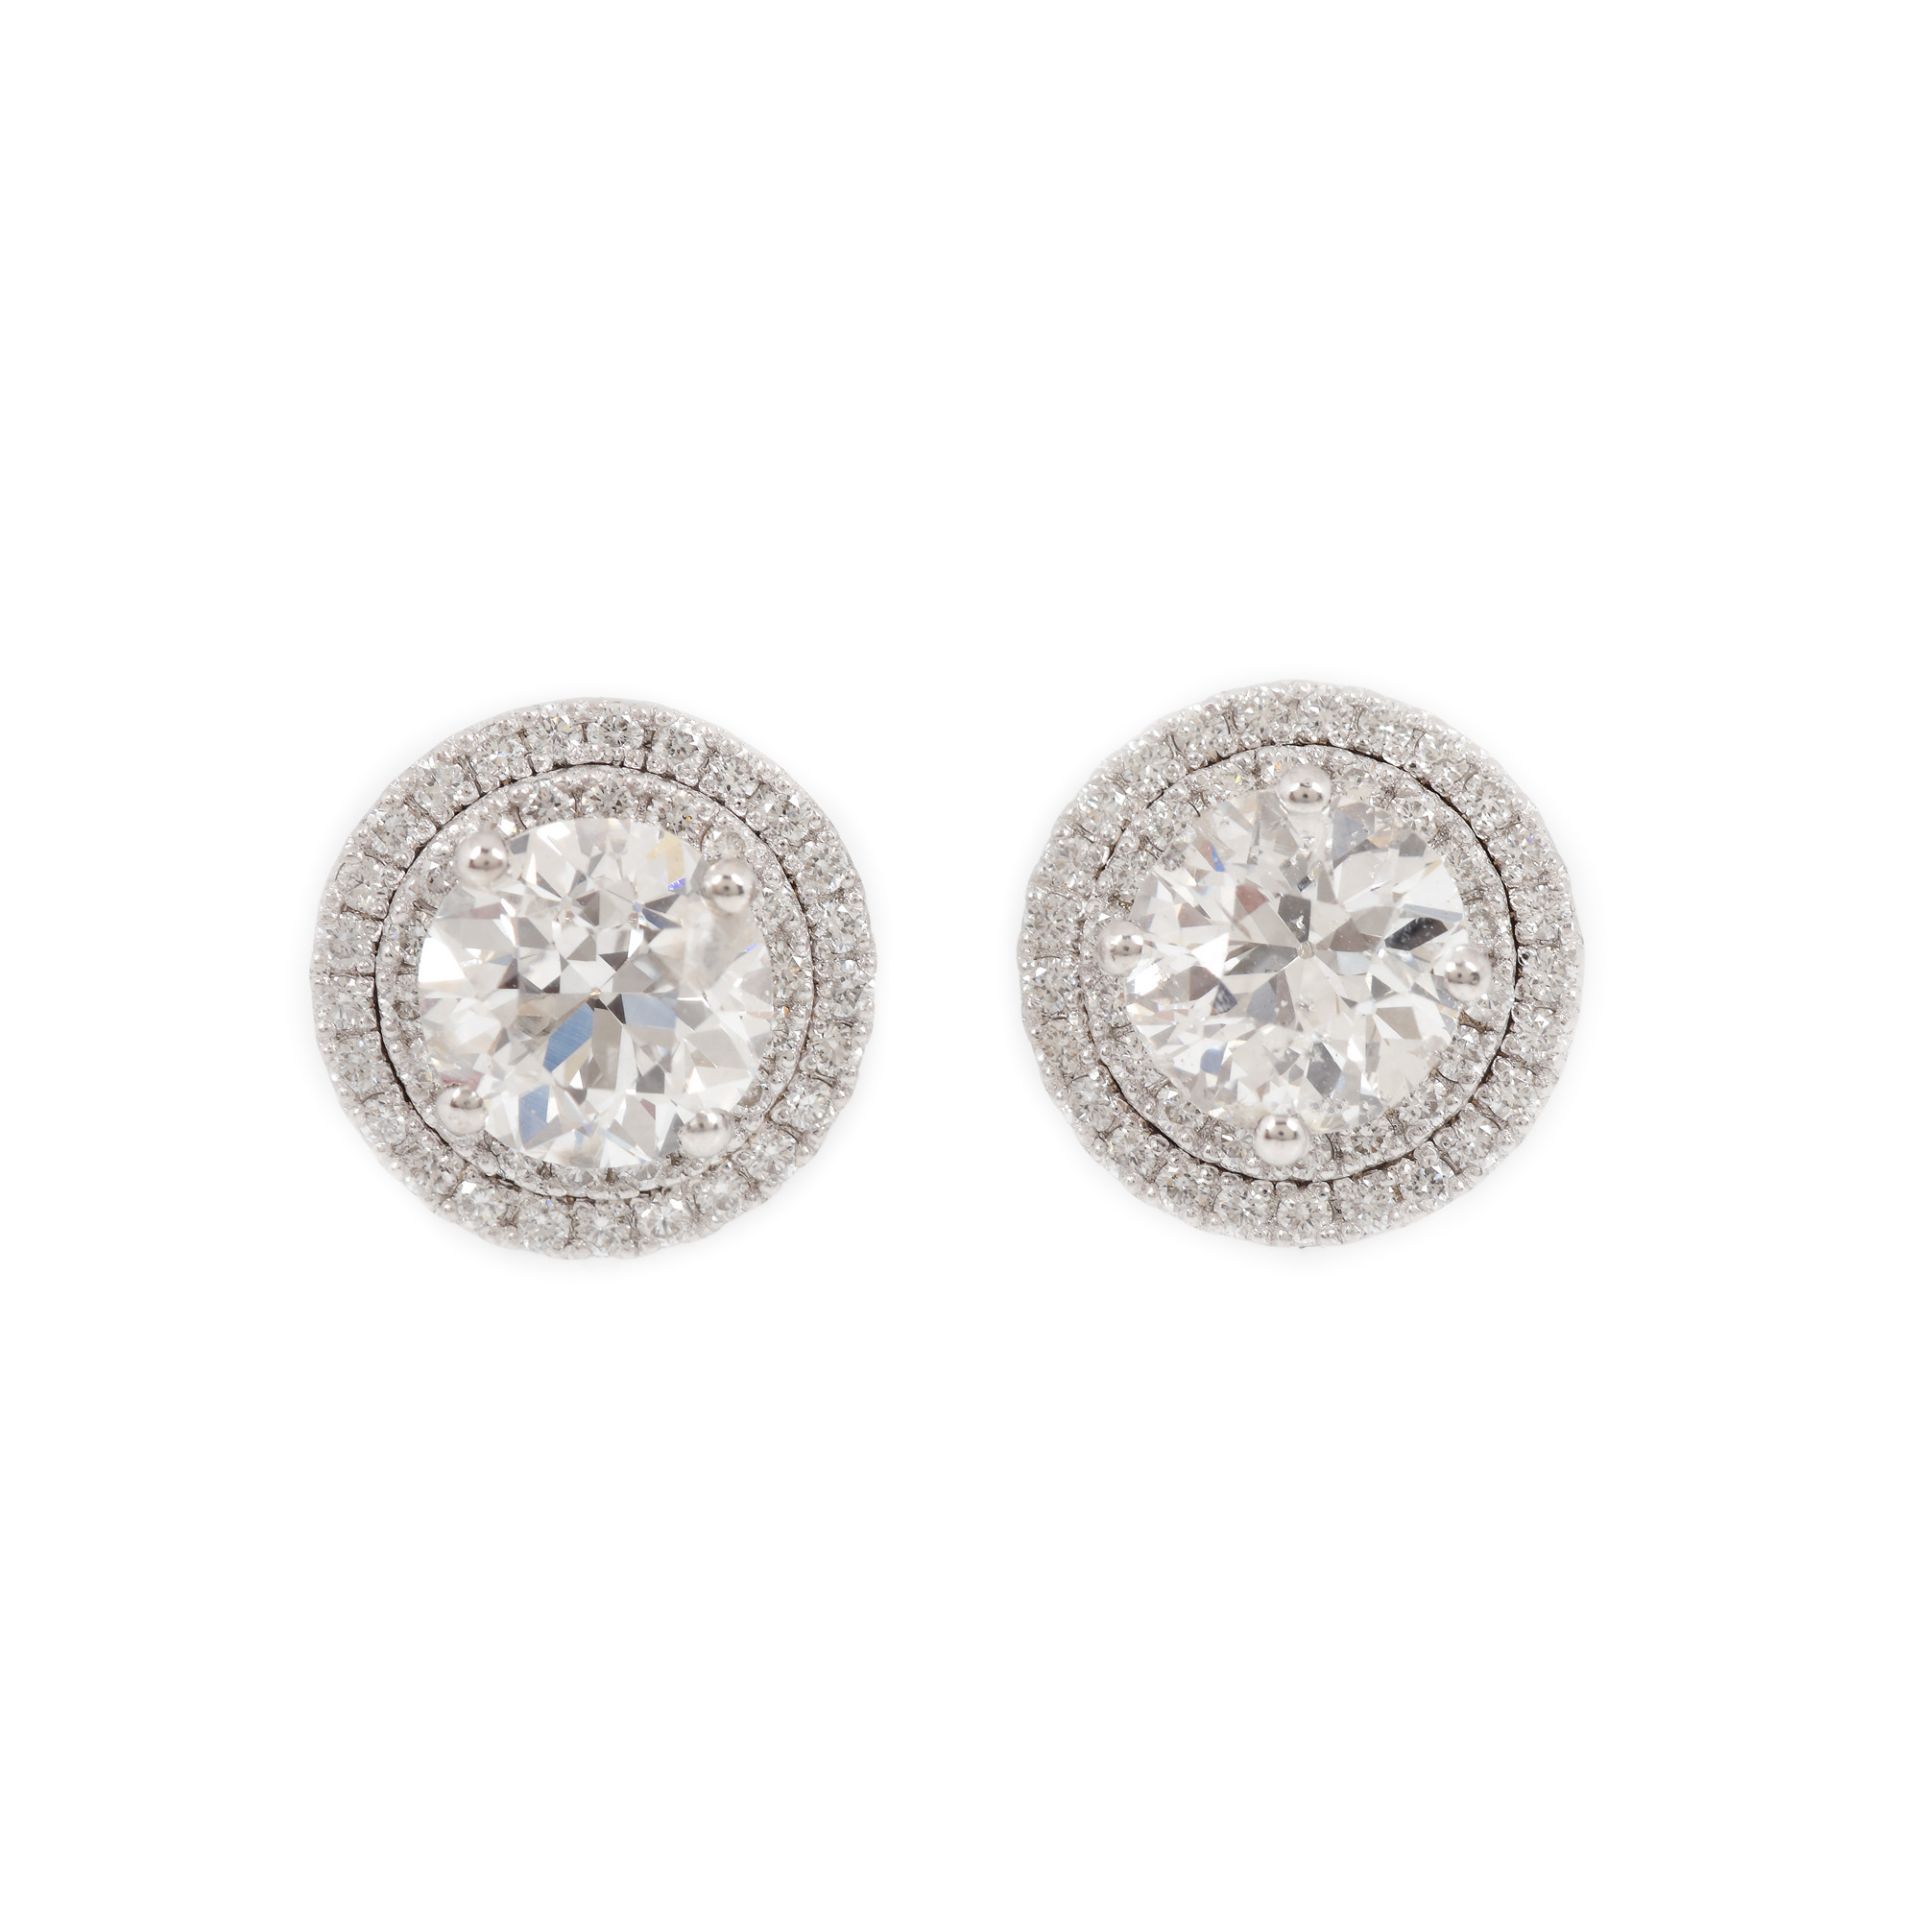 Earrings, white gold, decorated with diamonds